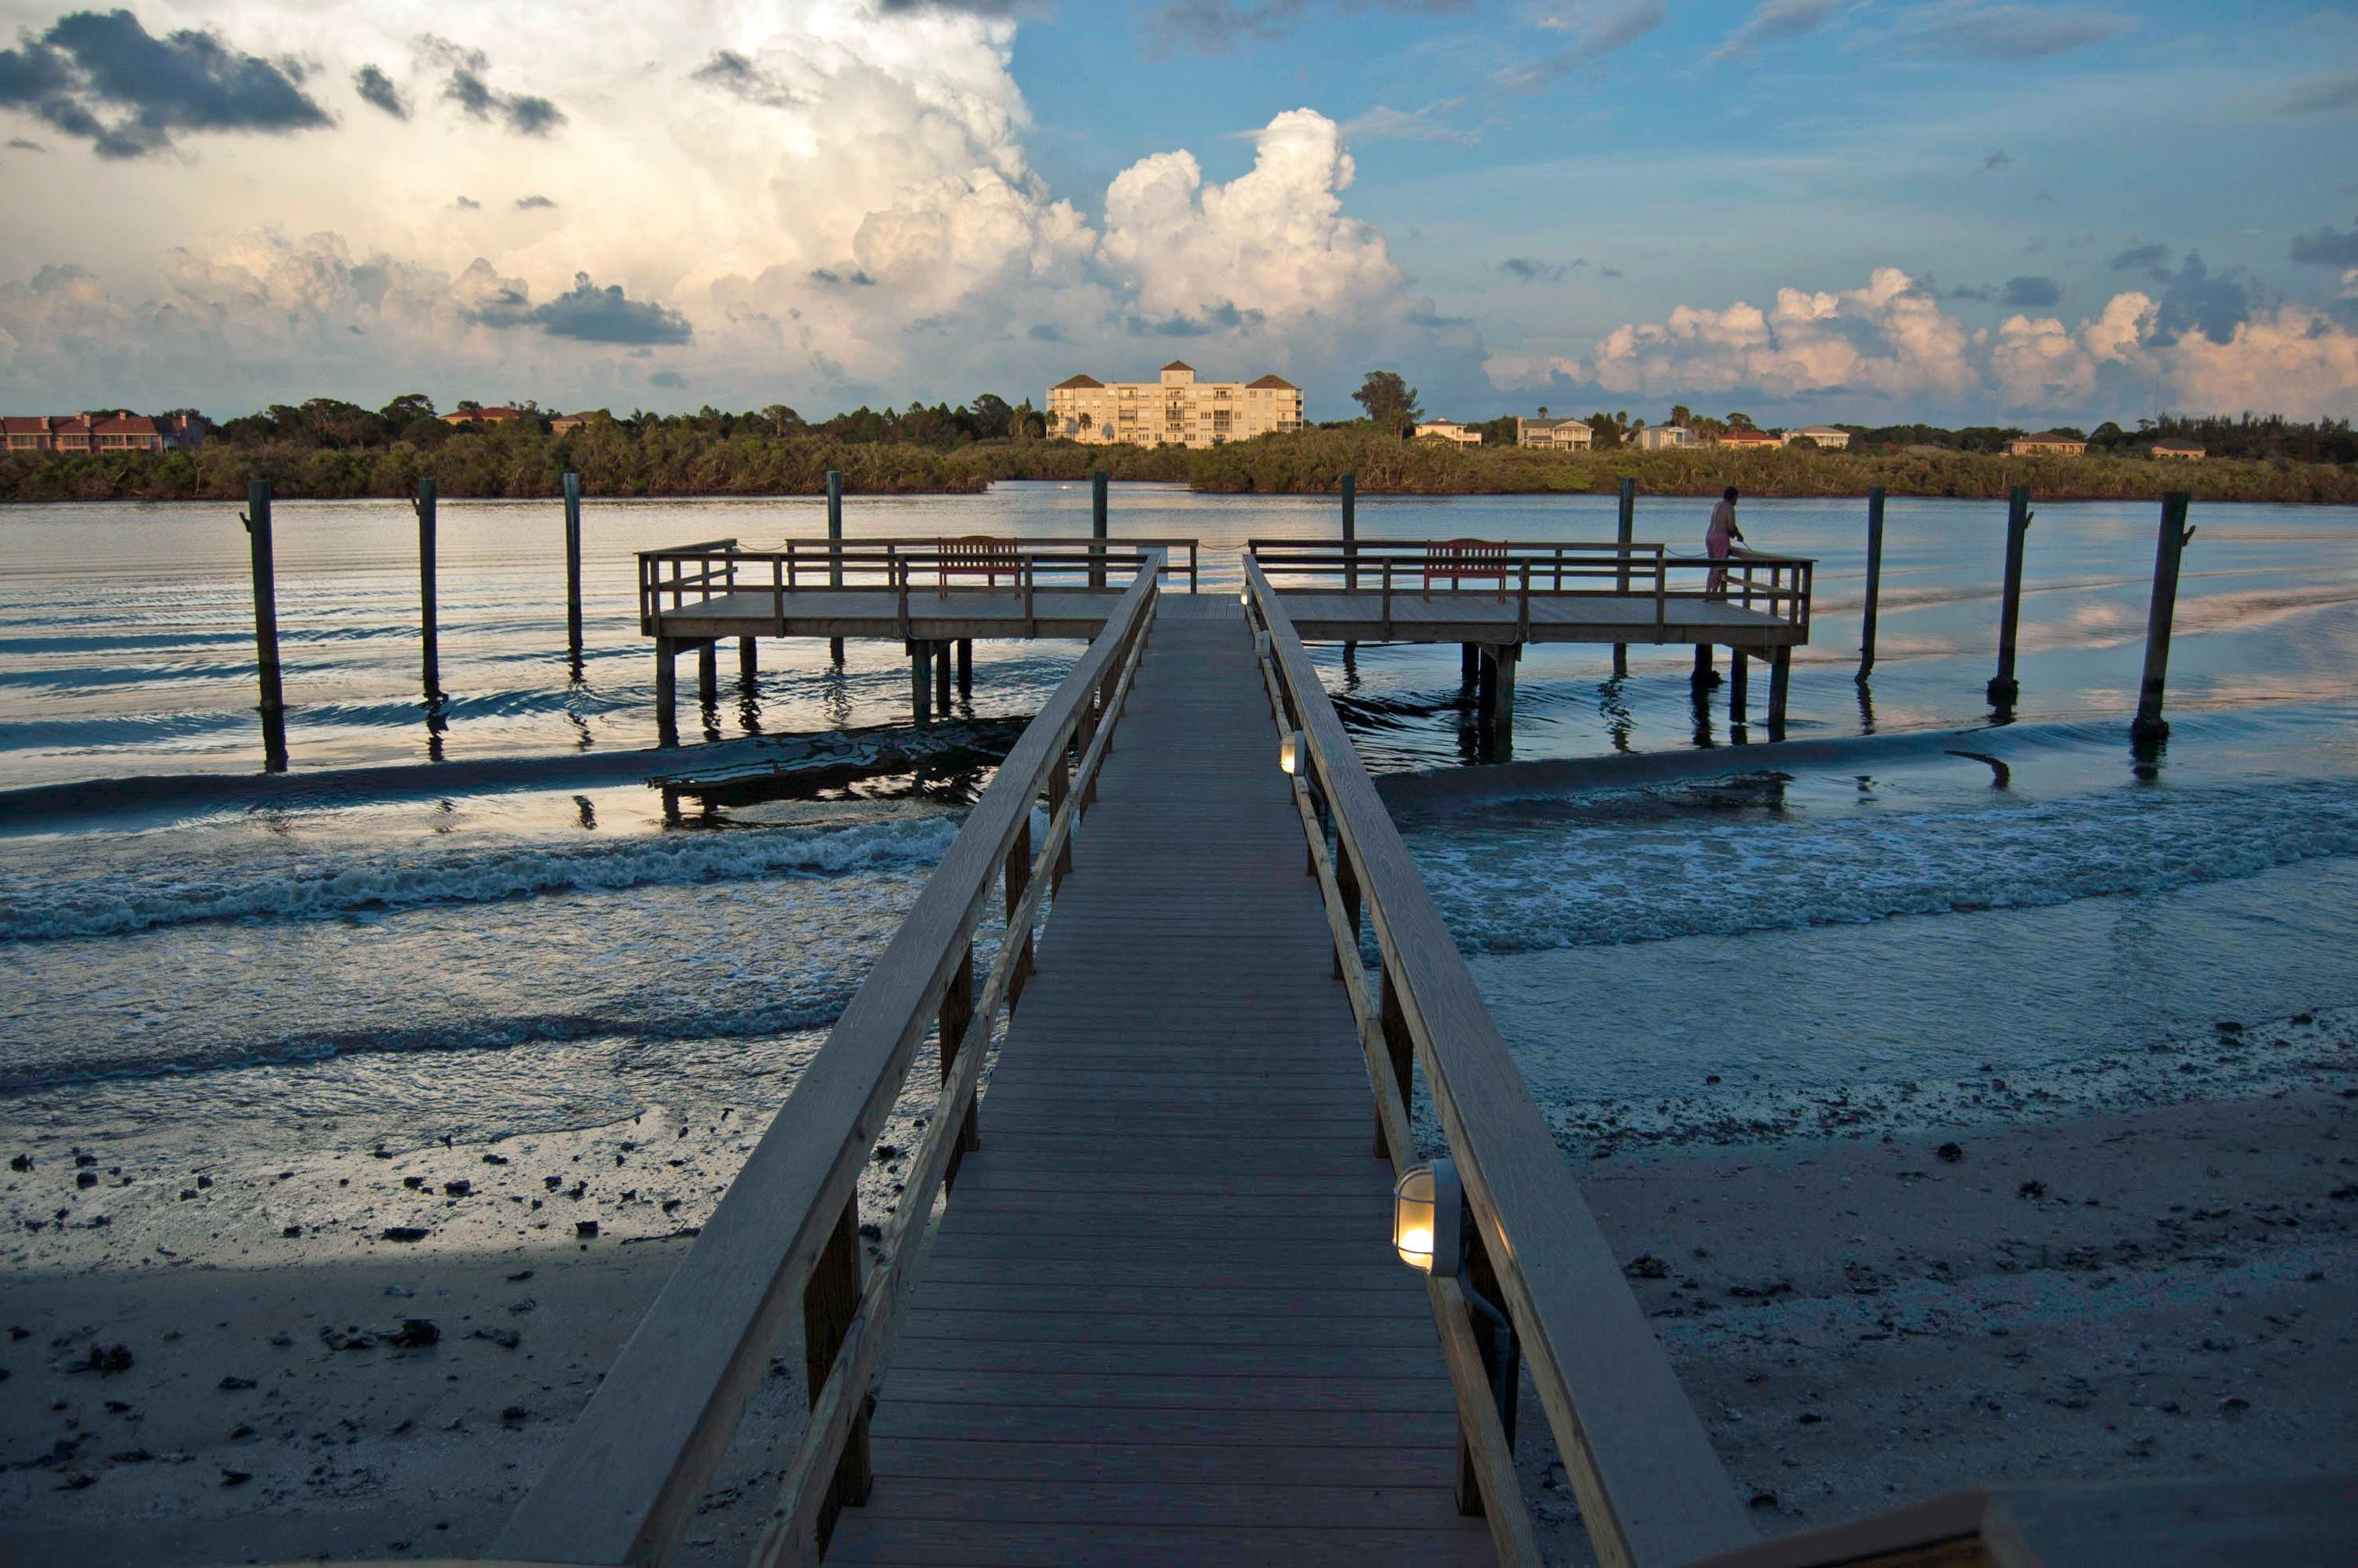 Legacy Vacation Resorts-Indian Shores Clearwater Beach Exteriér fotografie